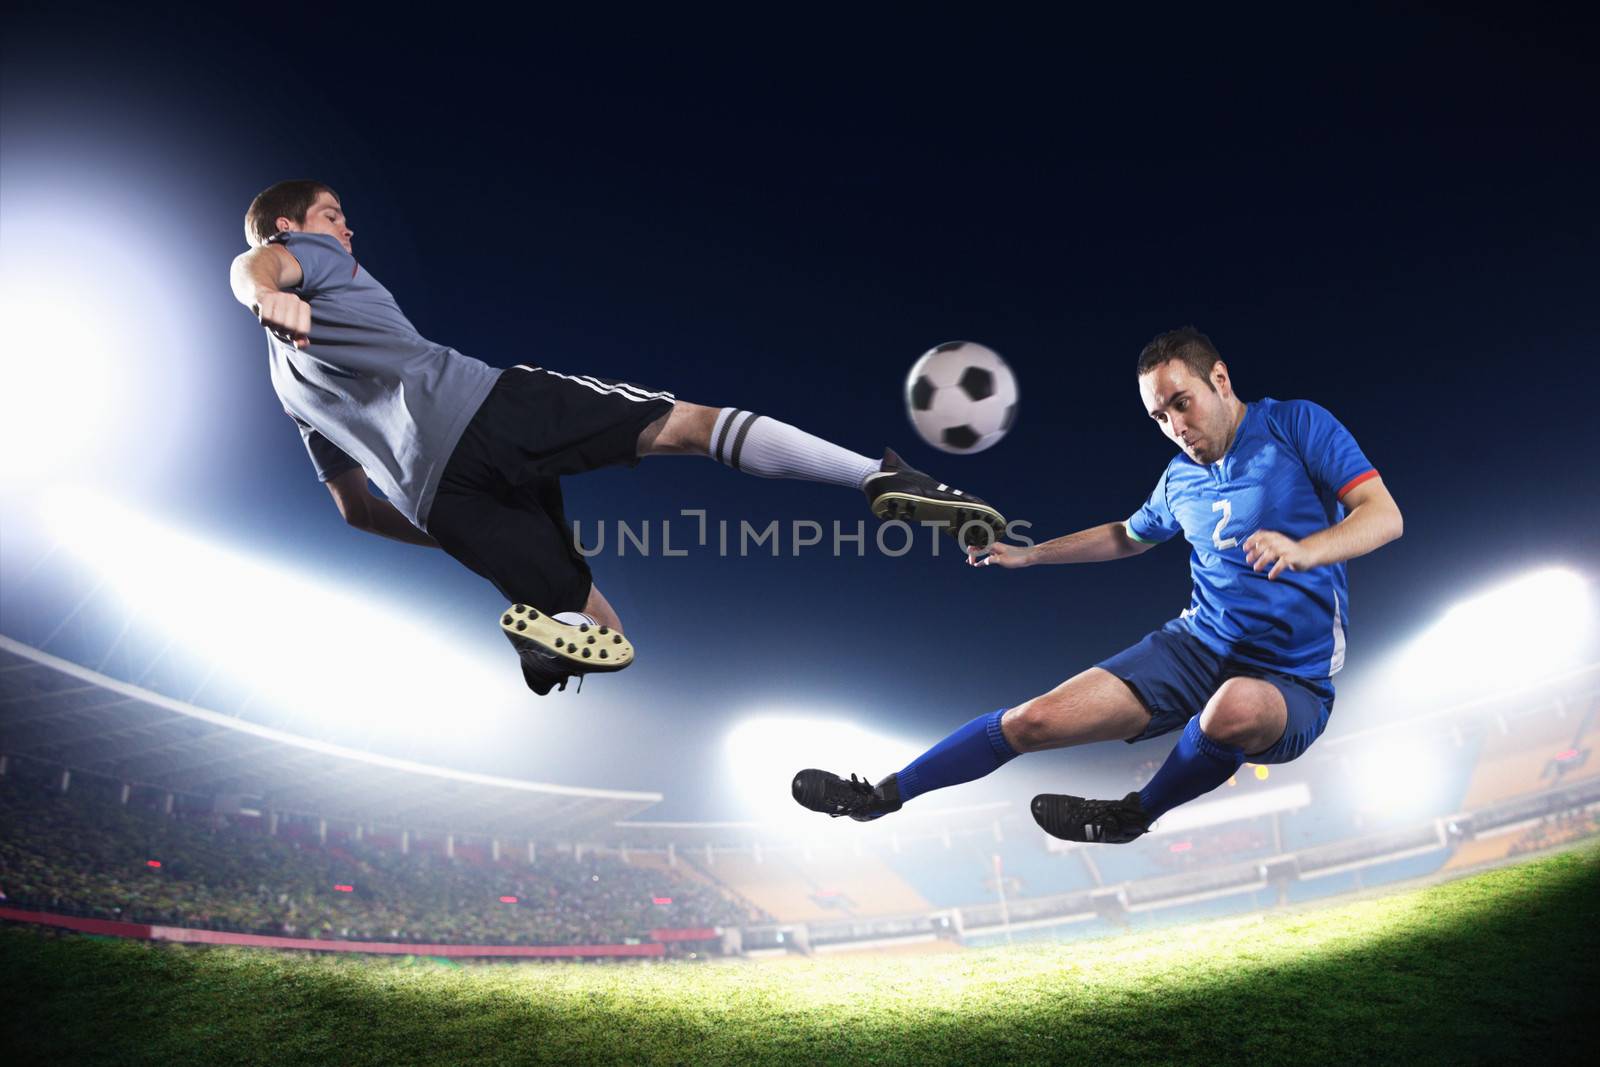 Two soccer players in mid air kicking the soccer ball, stadium lights at night in background by XiXinXing